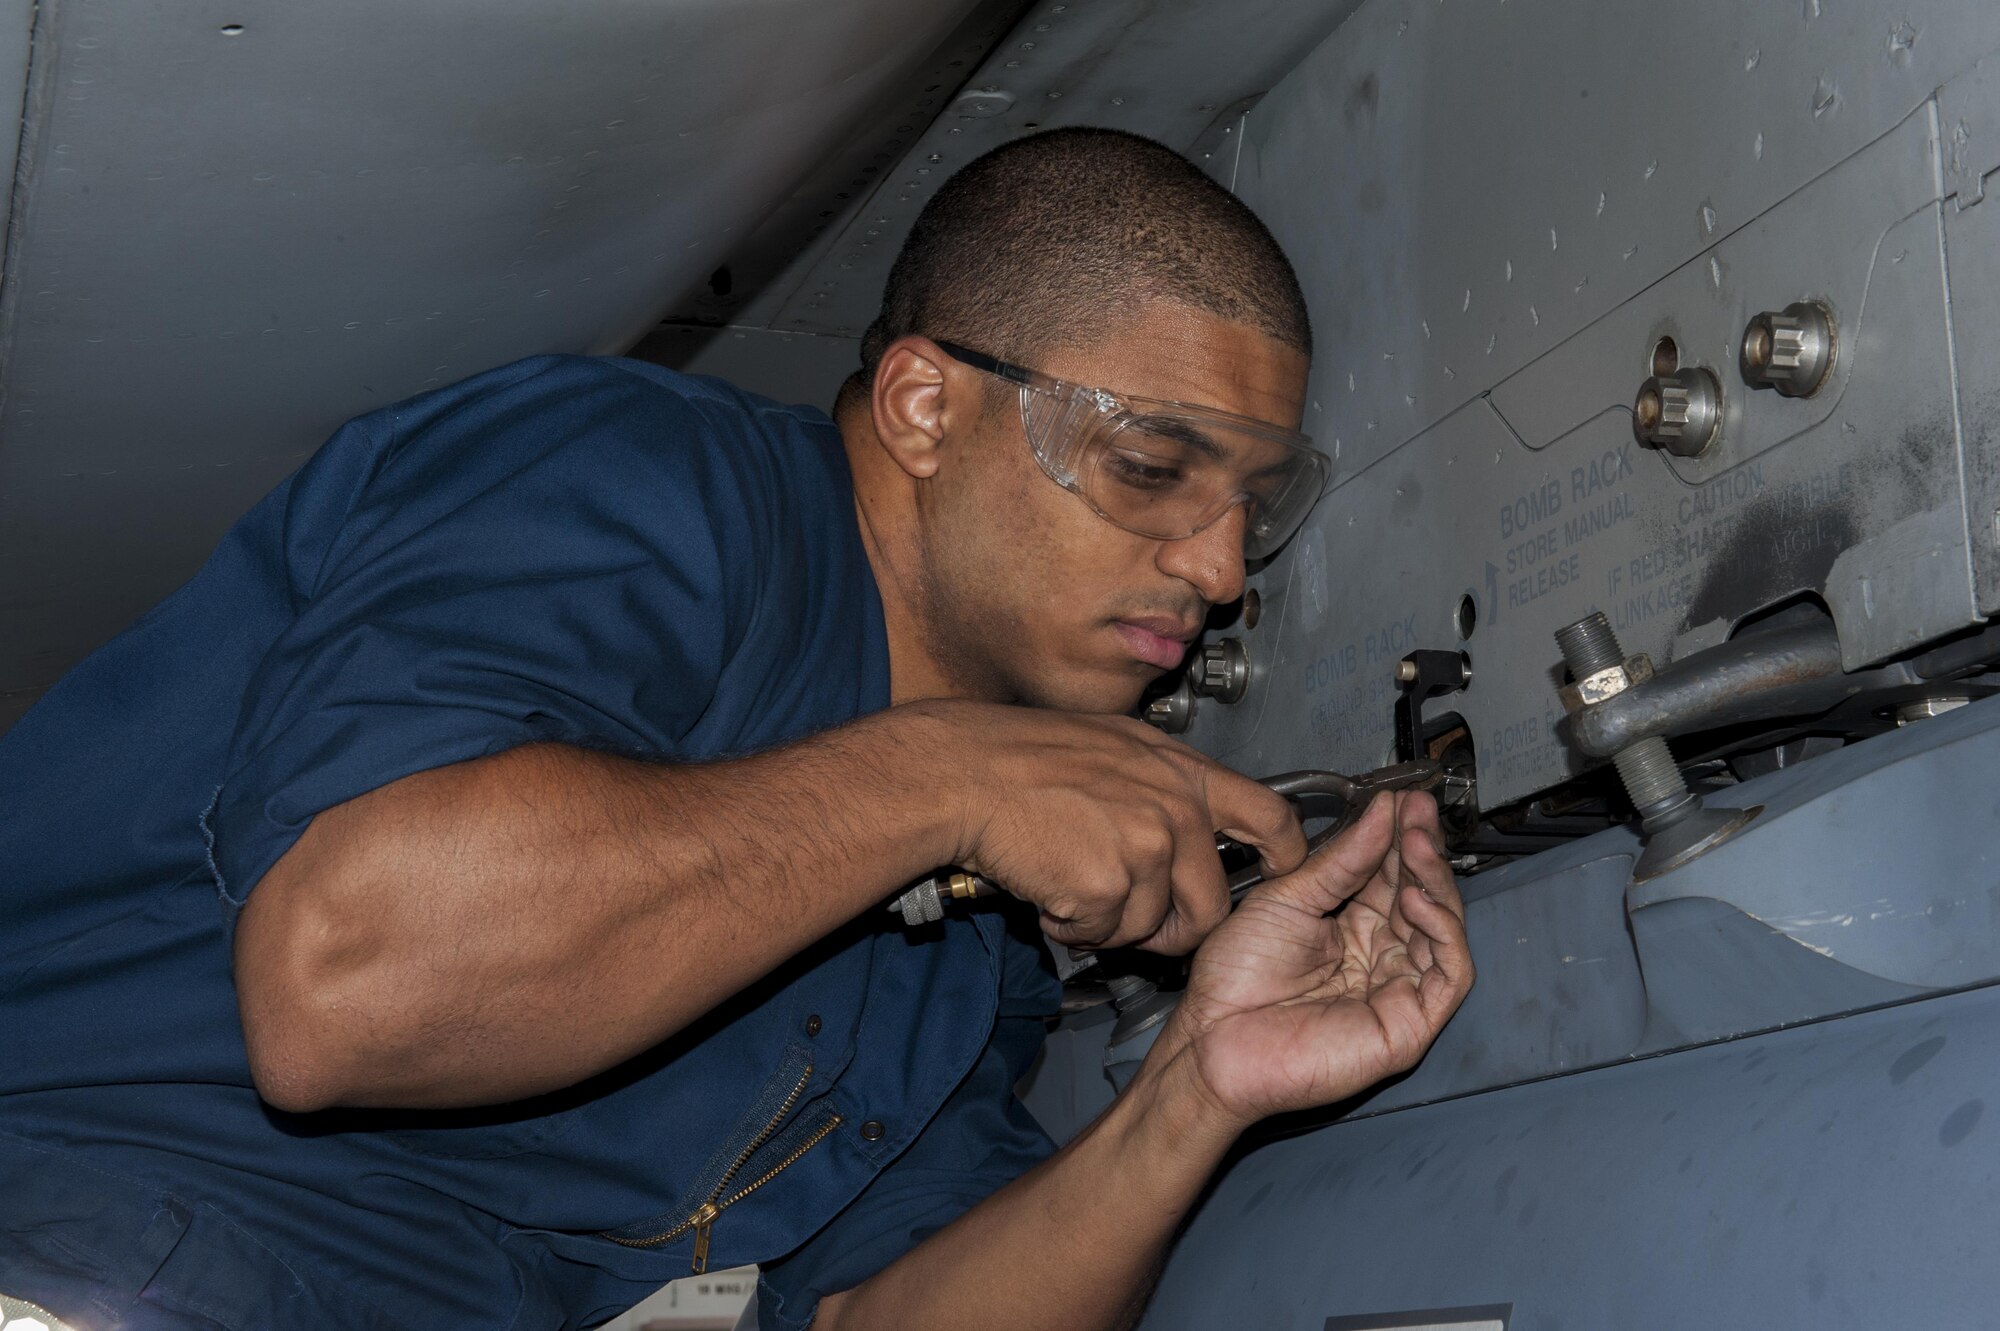 U.S. Air Force Airman 1st Class Brandon Martel, 67th Aircraft Maintenance Unit avionics technician apprentice, secures safety wire for a sniper pod on an F-15C Eagle, Dec. 8, 2015, at Kadena Air Base, Japan. The safety wire and attached pin ensure the sniper pod cannot be accidently jettisoned during flight. (U.S. Air Force photo by Airman Zackary A. Henry)